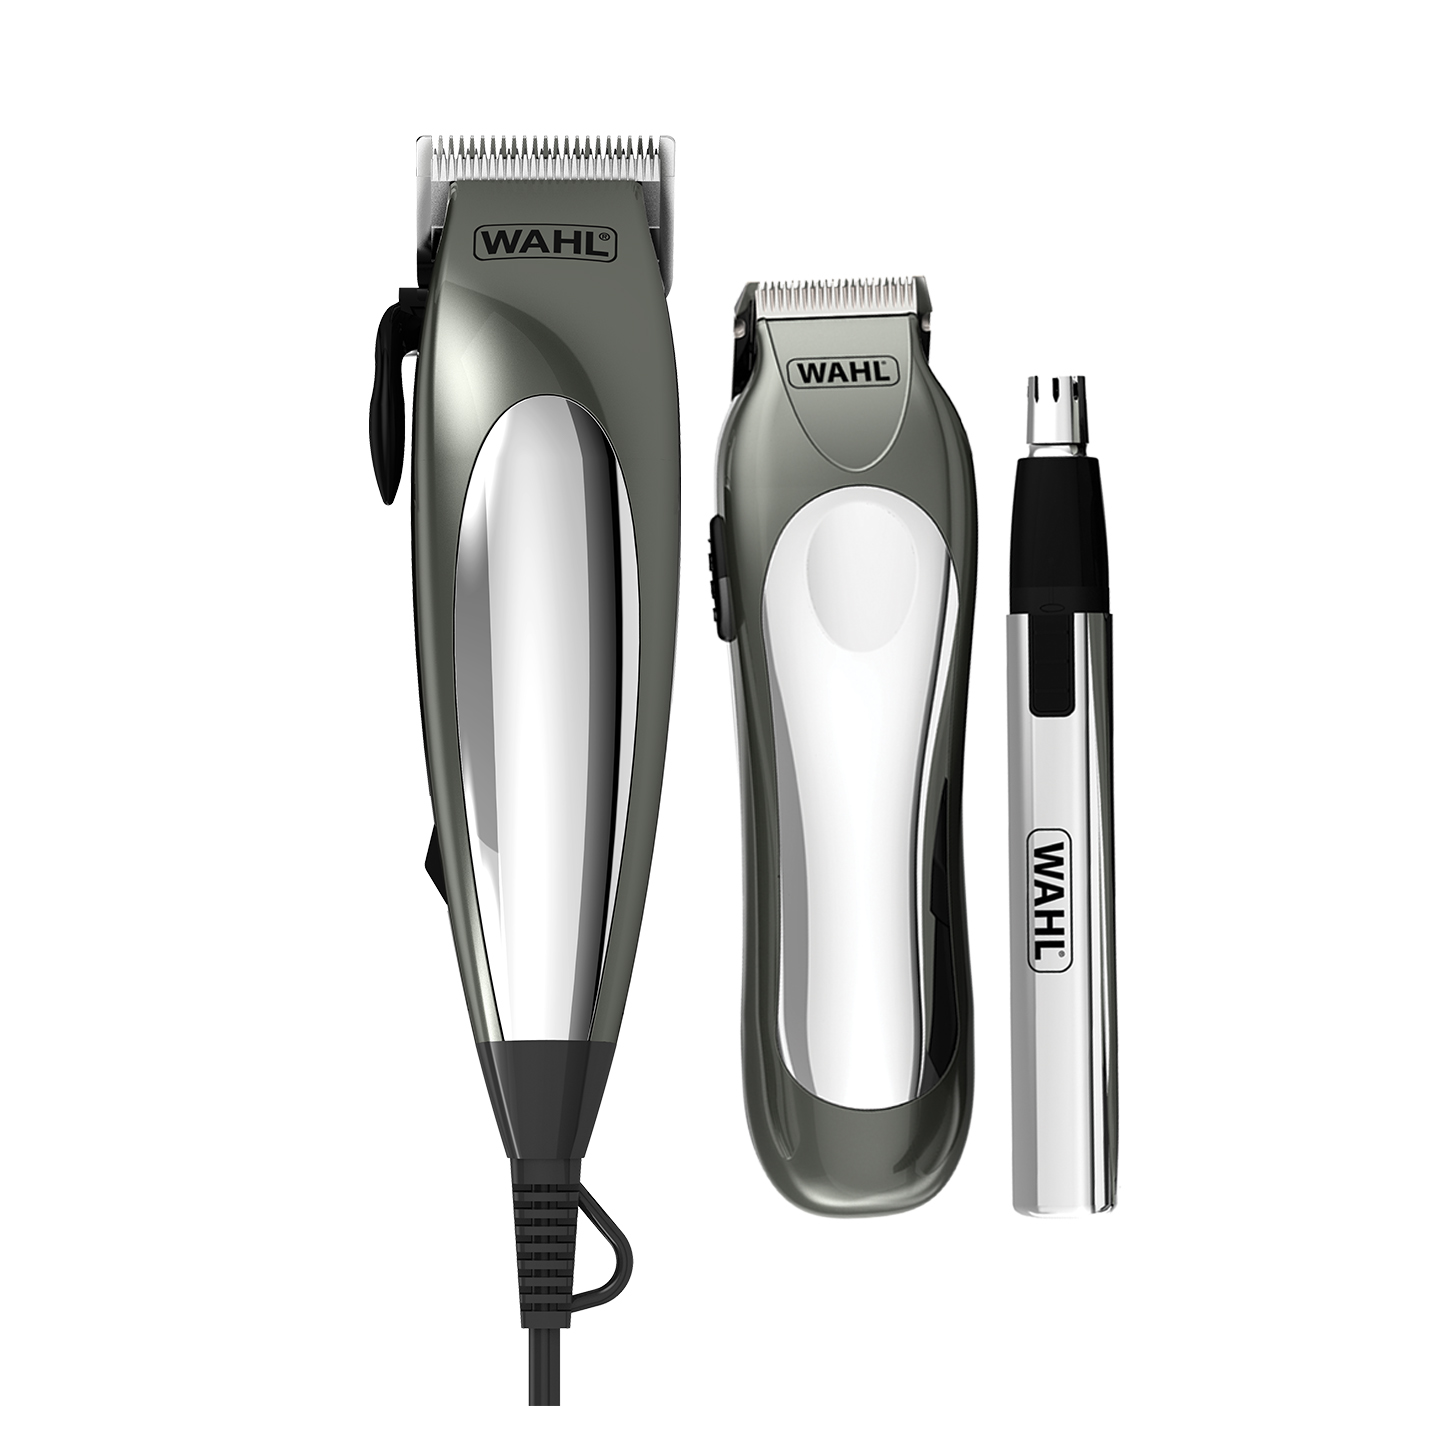 wahl clippers full set